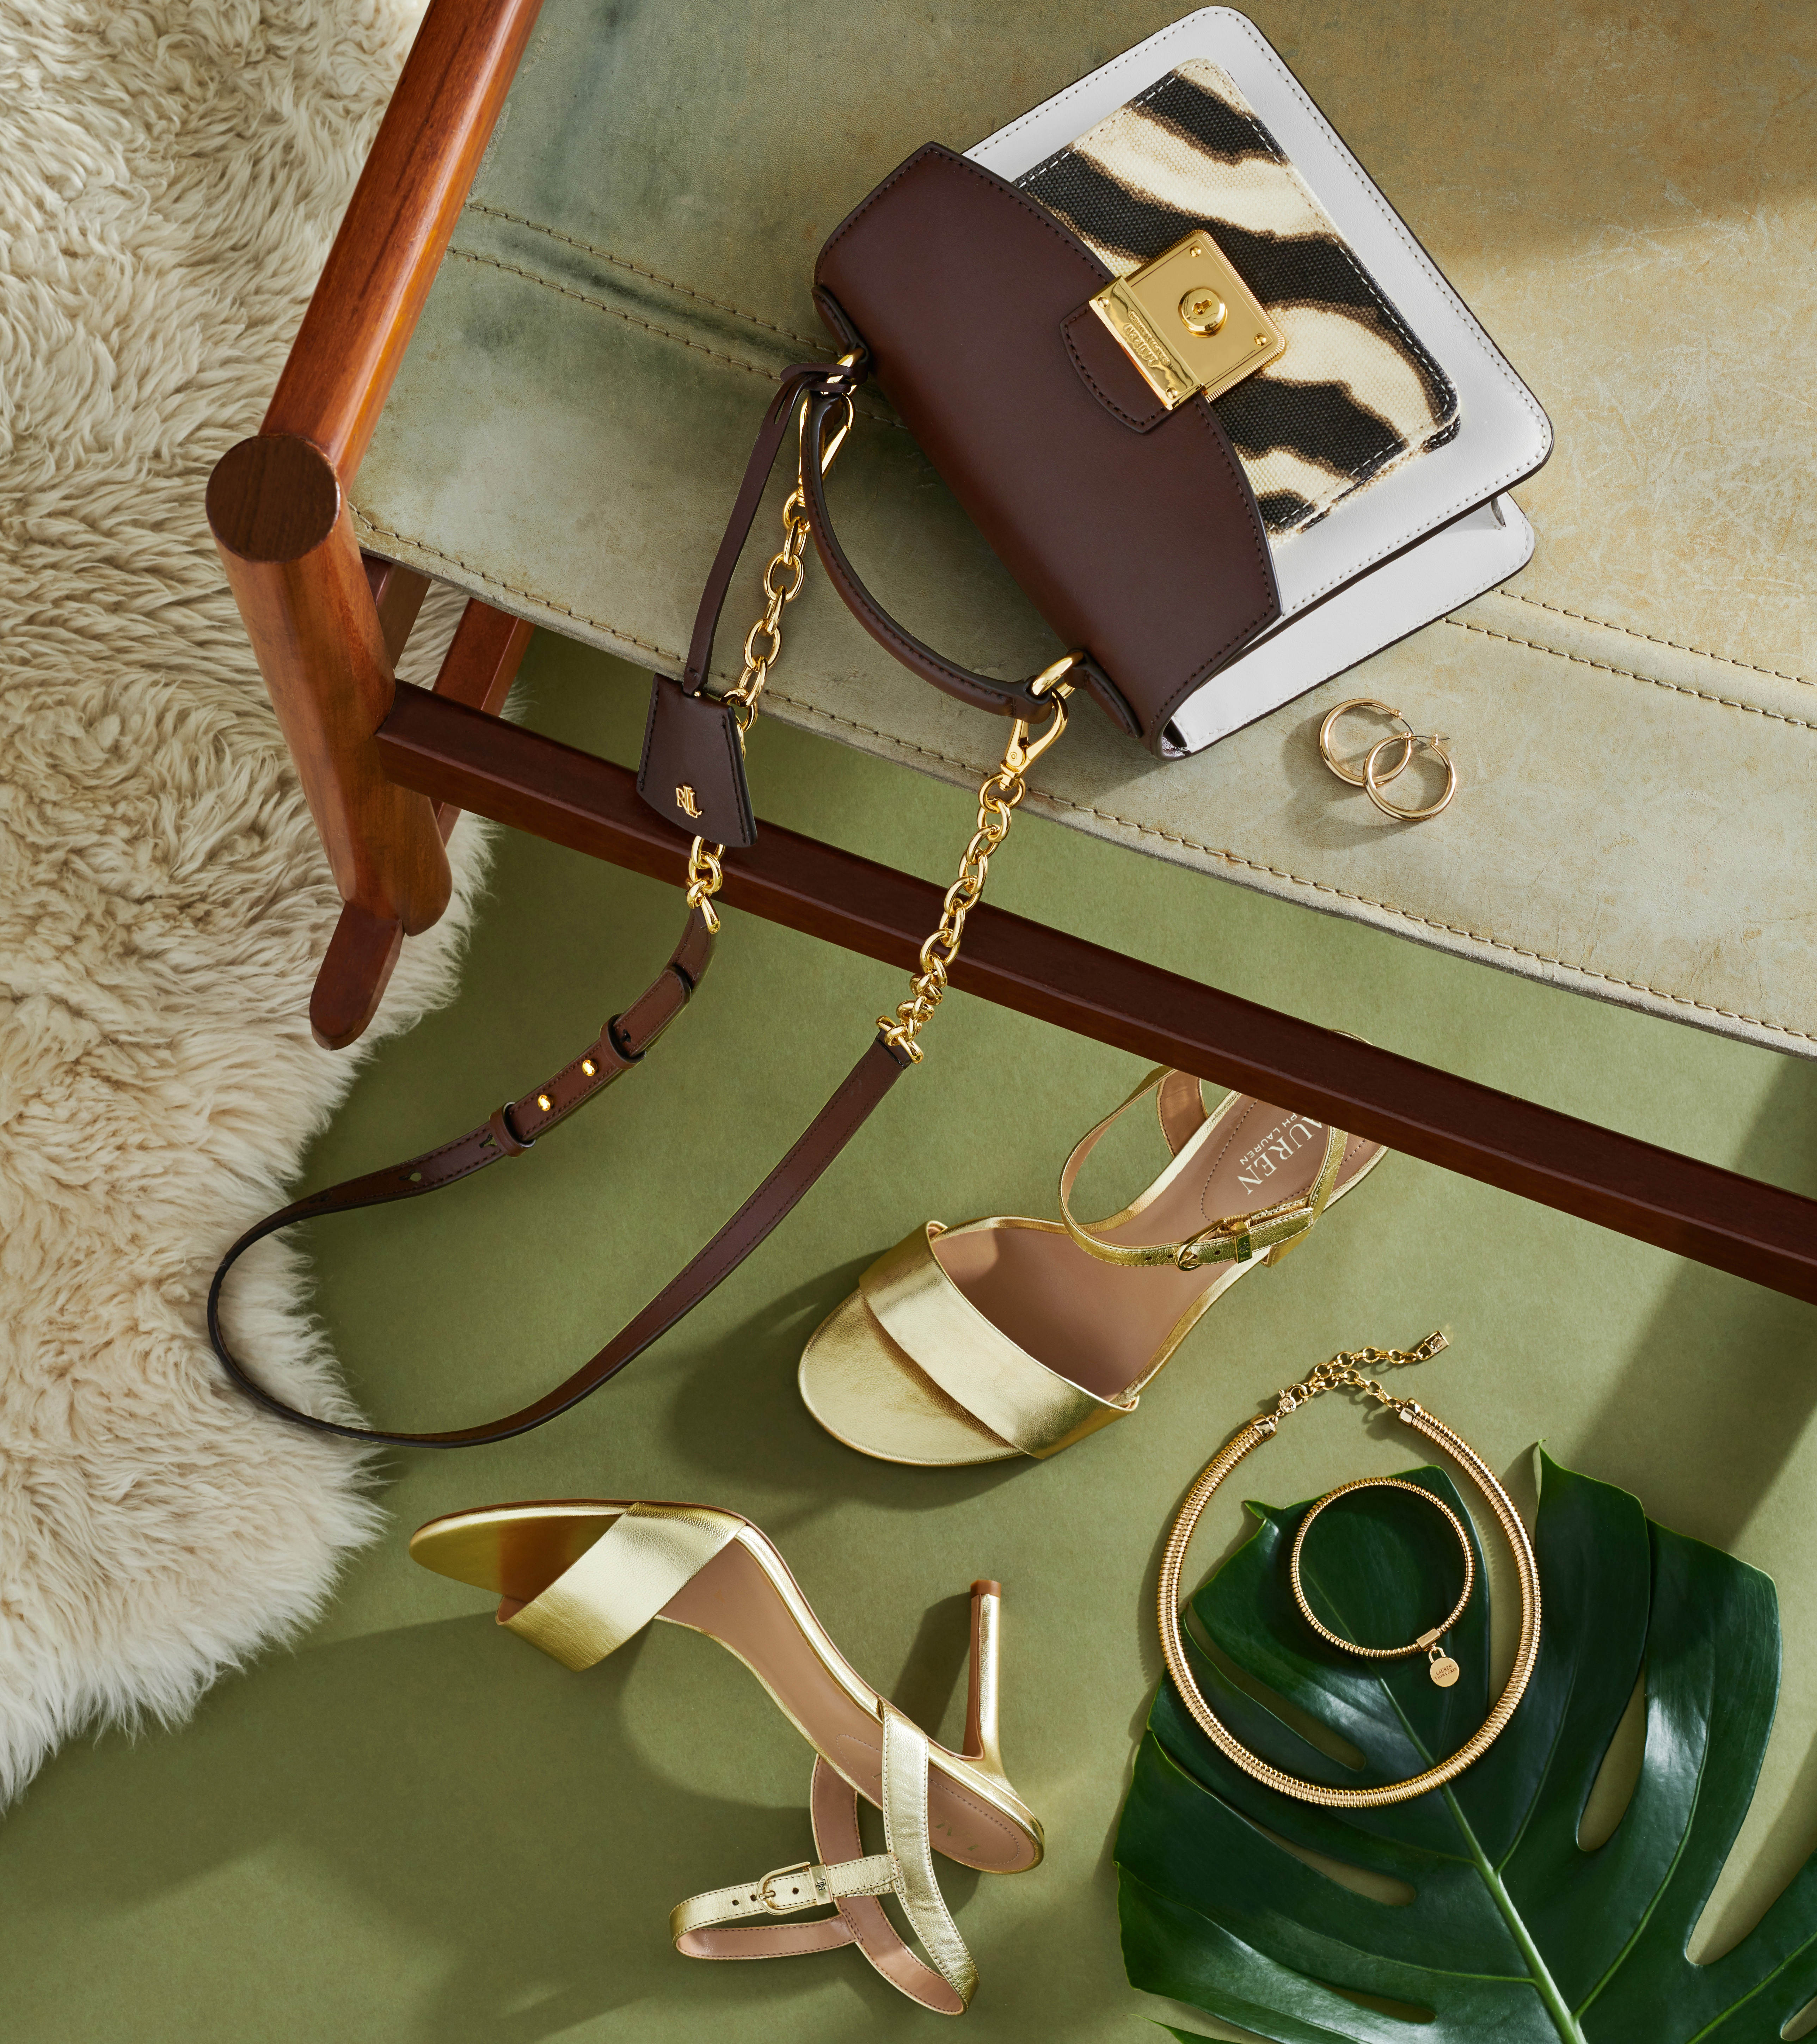 Fashion accessories on Green by Alison Gootee Photography for Instyle and Ralph Lauren